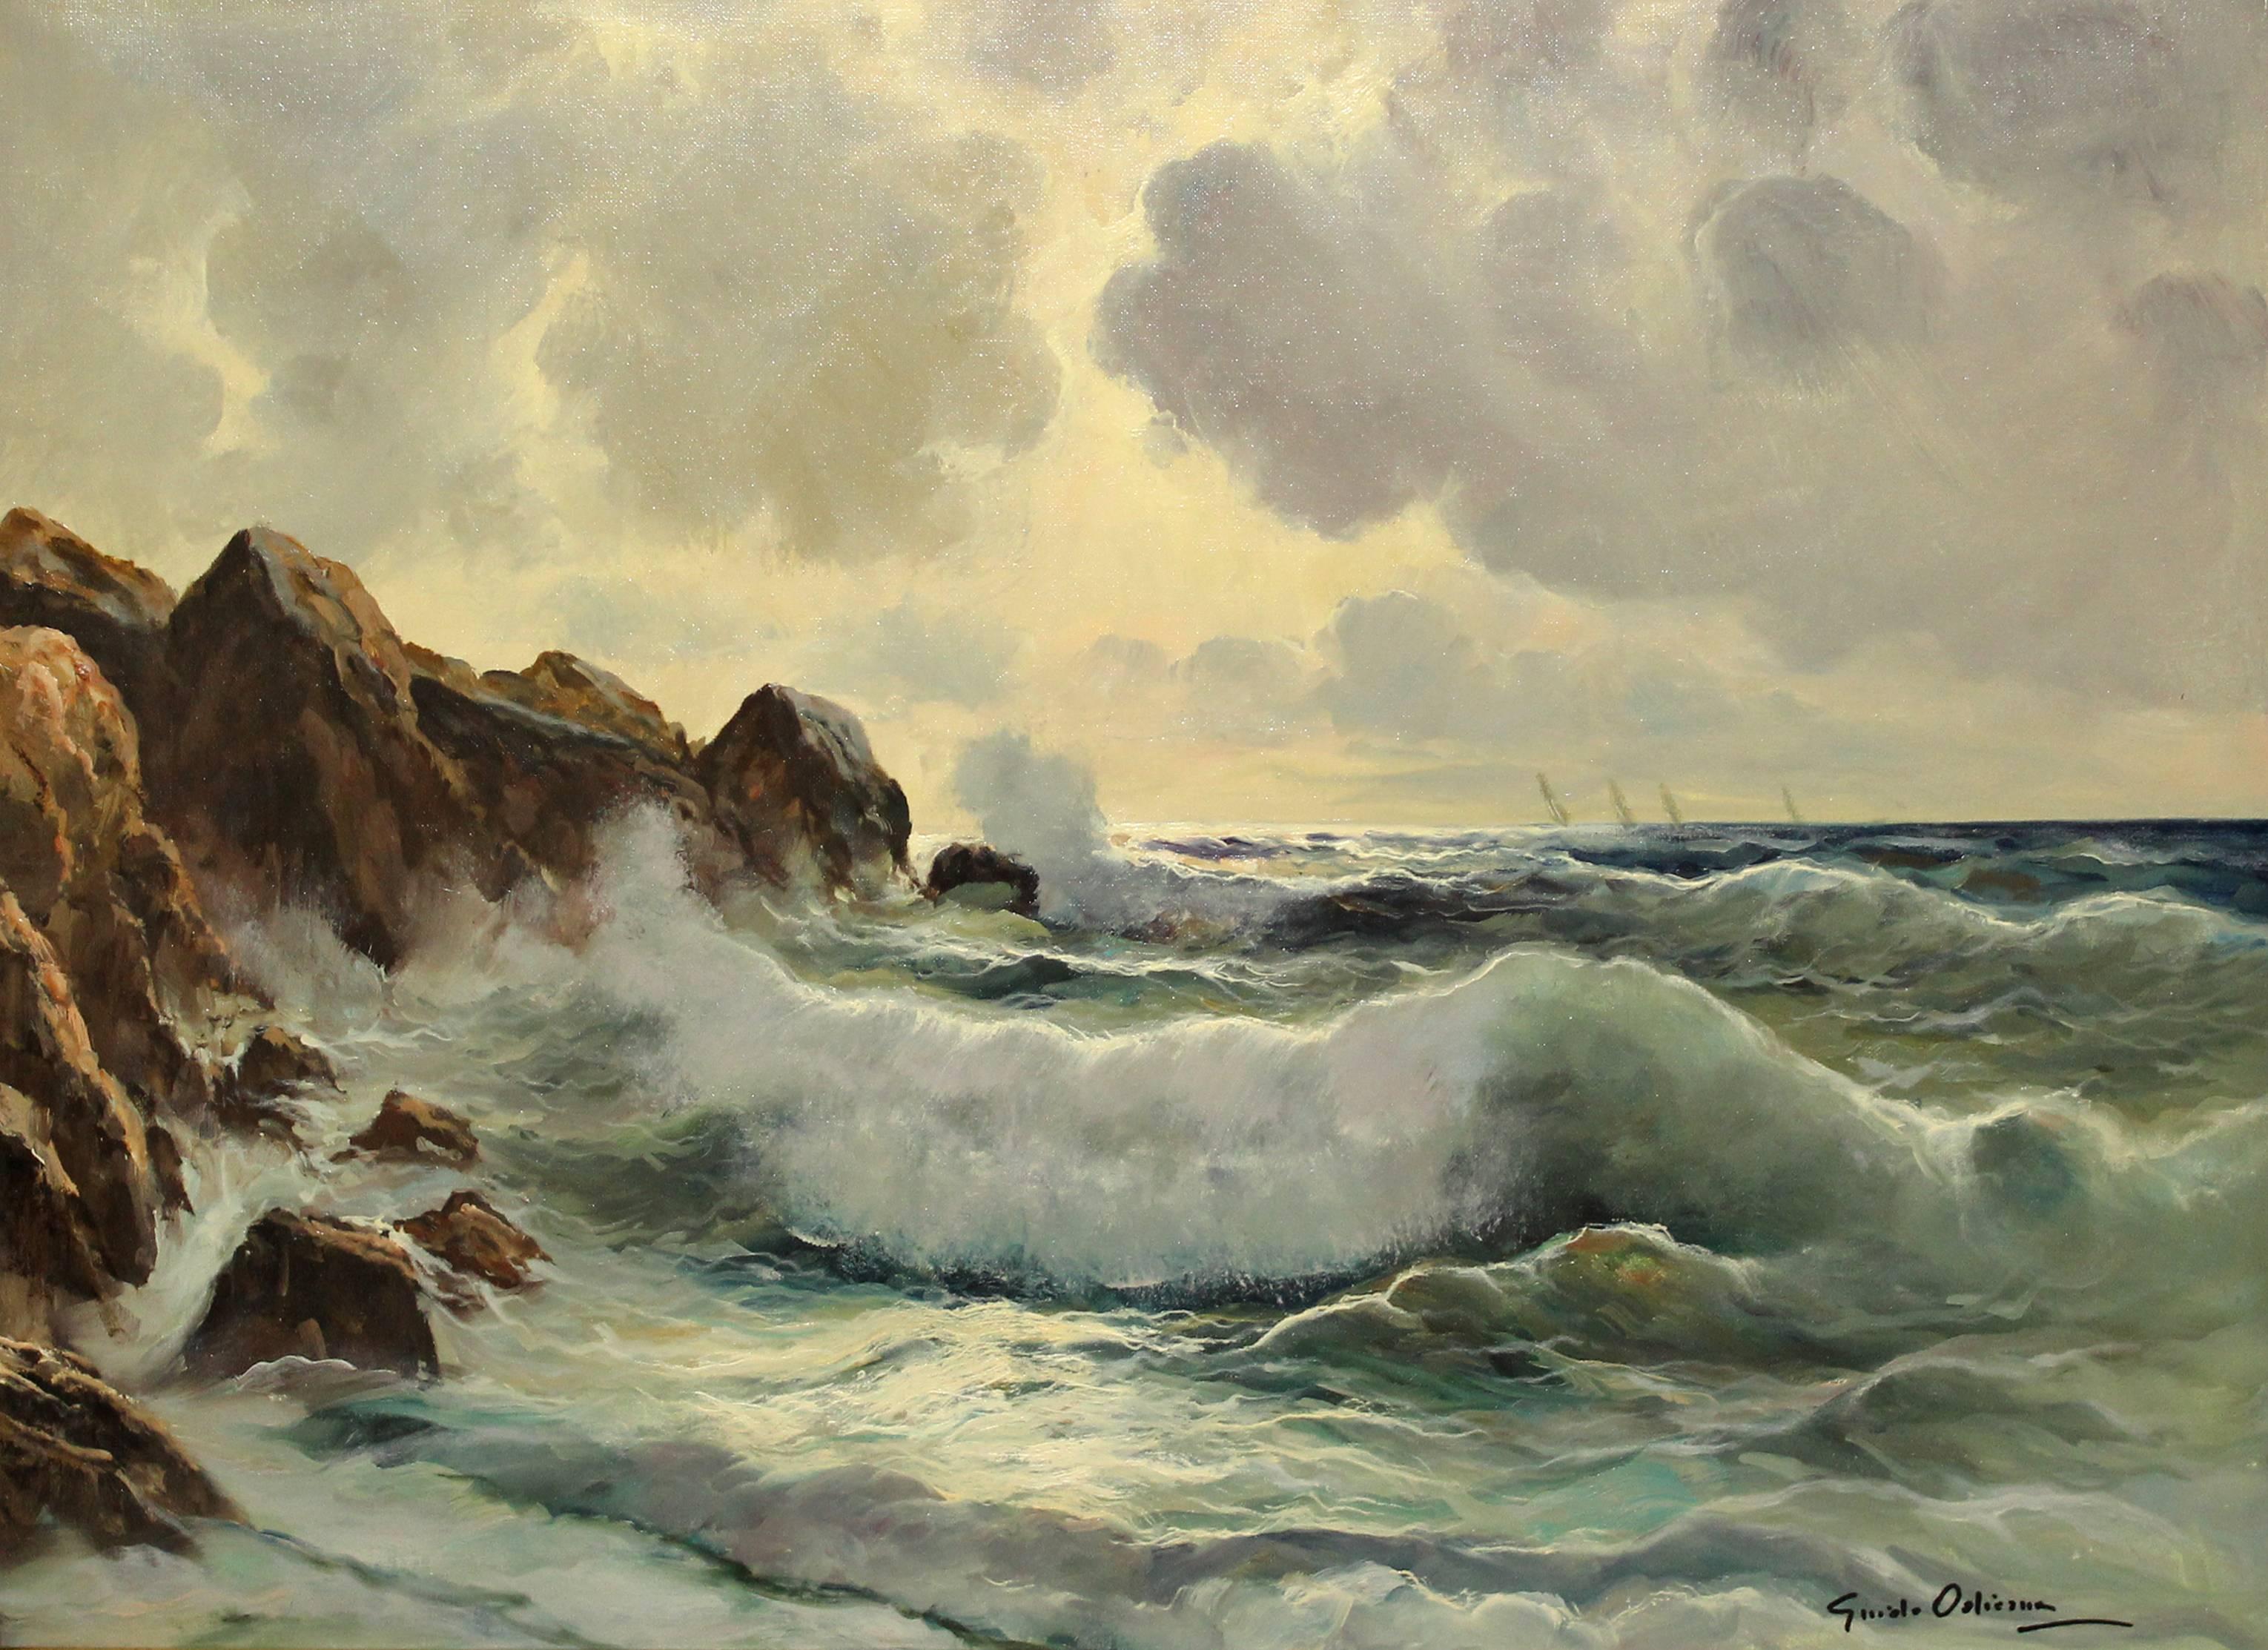 Rough Waters Capri - Painting by Guido Odierna